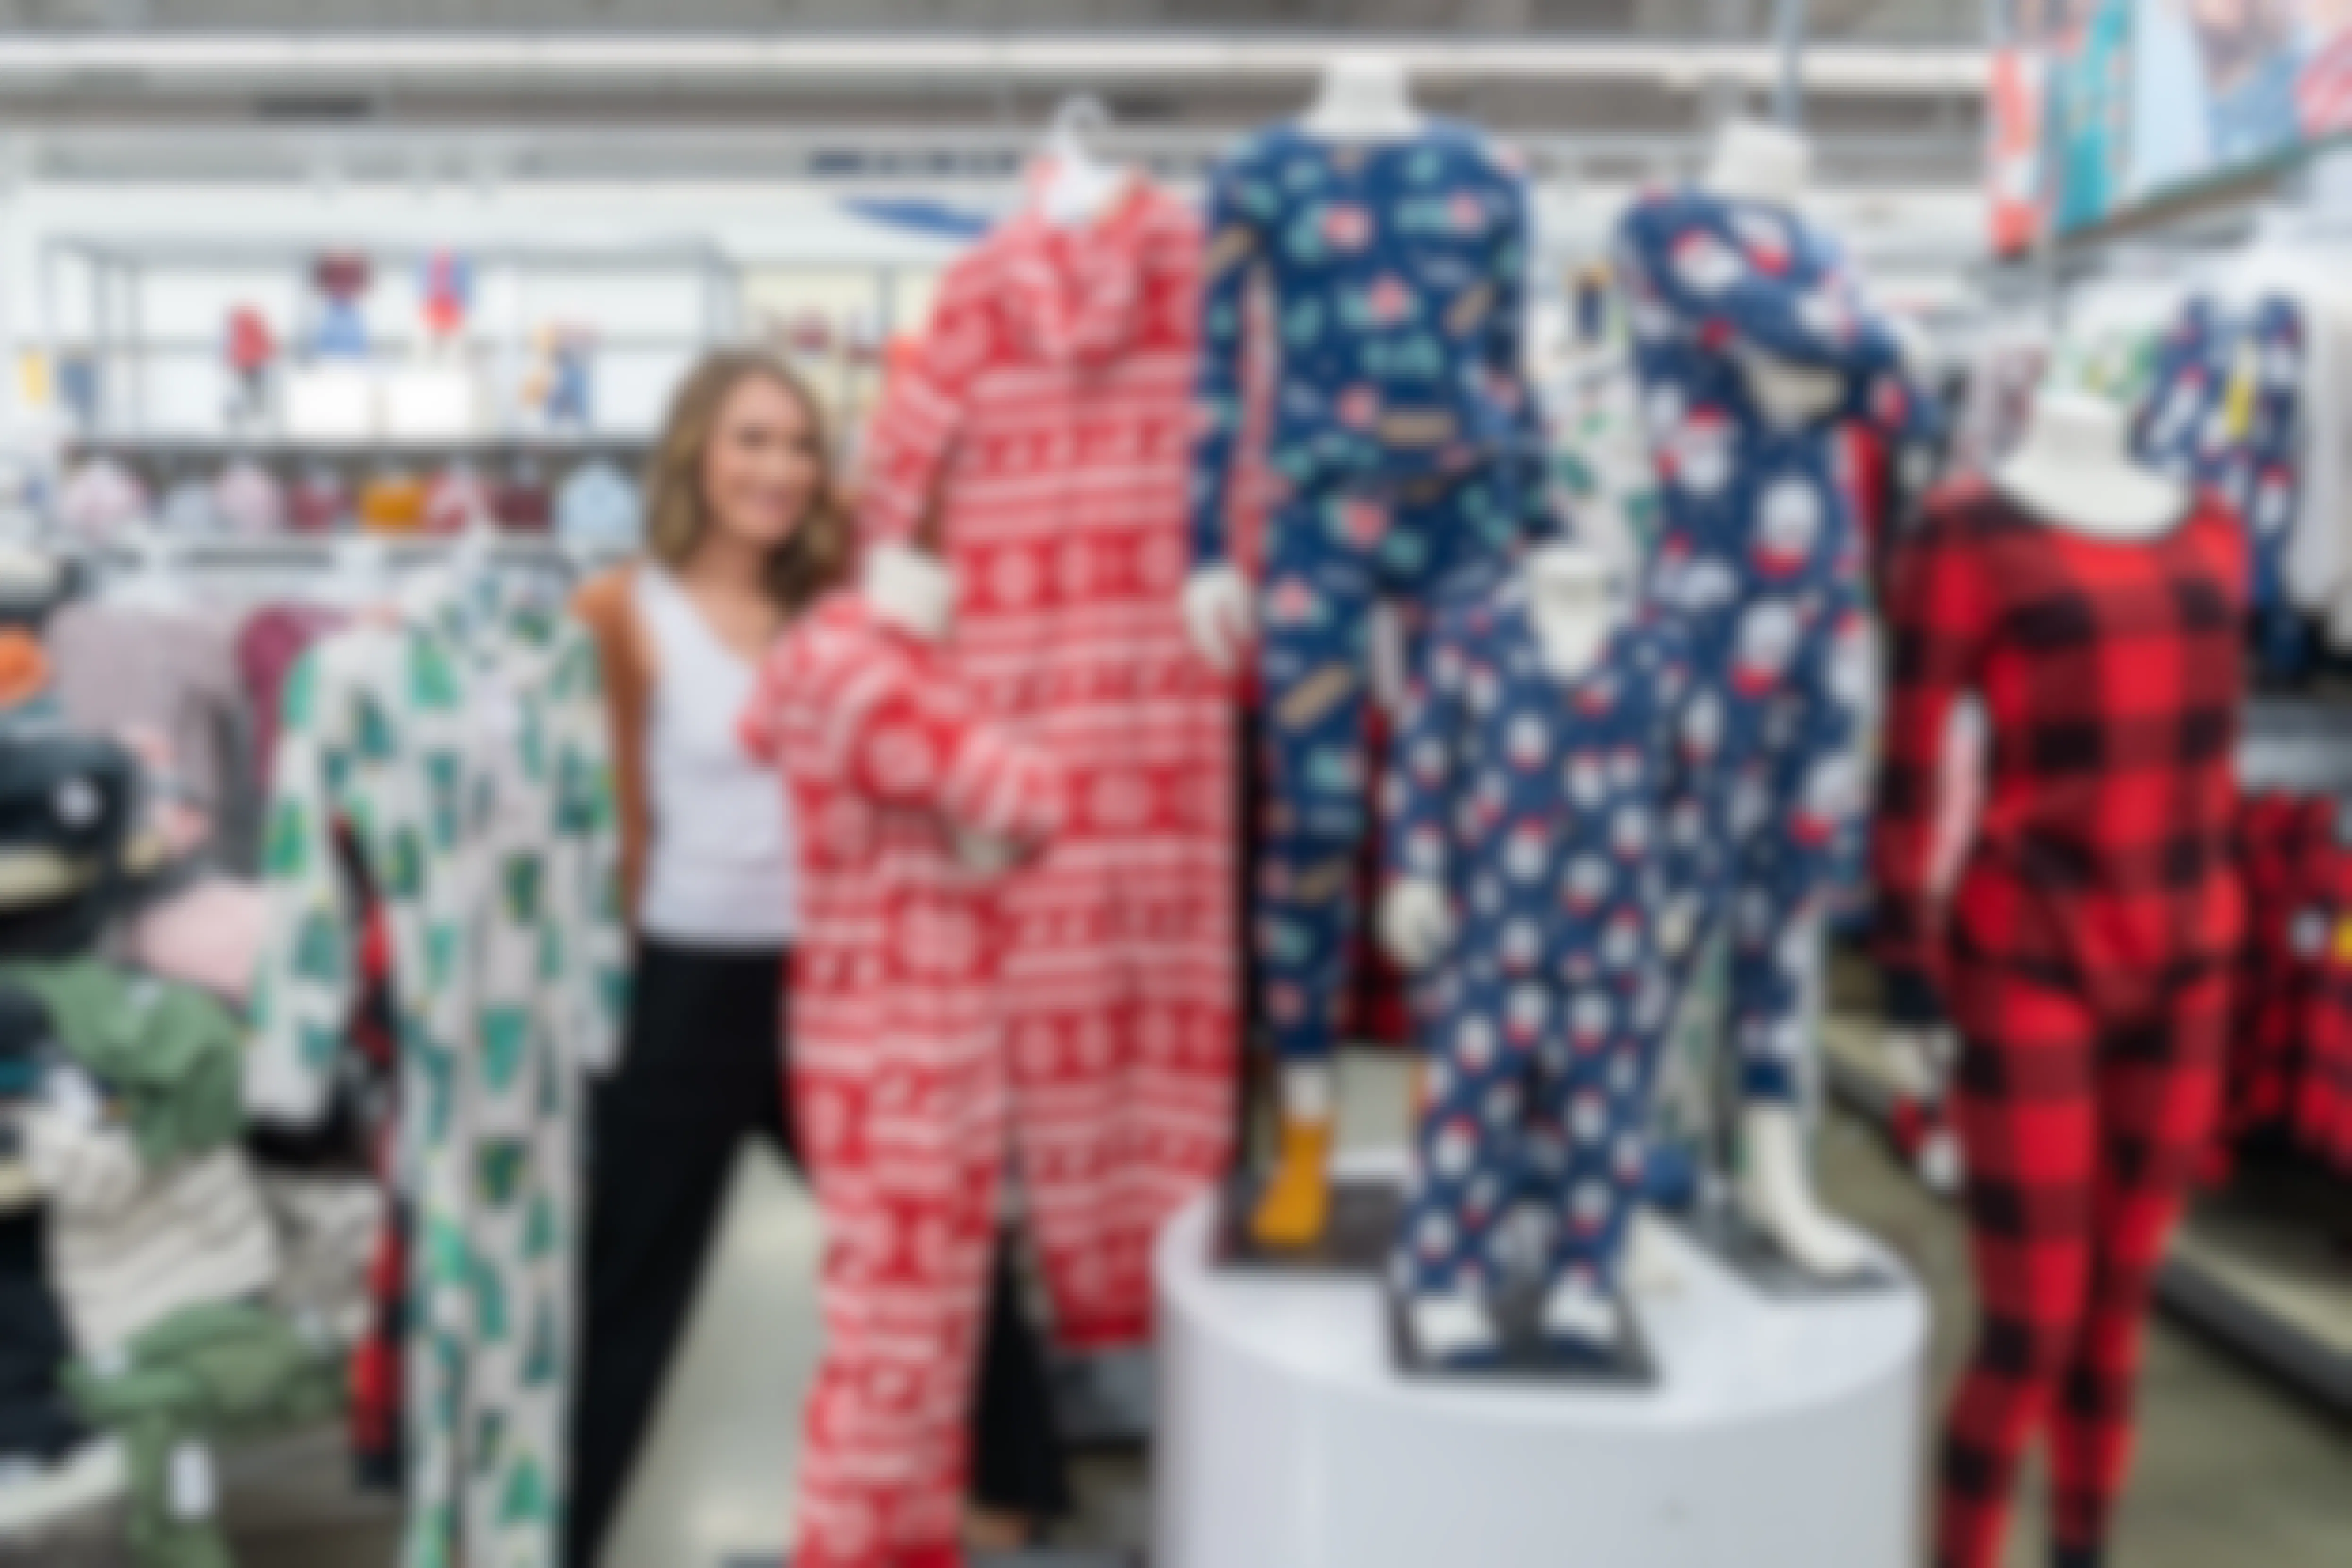 A woman posing with some onesie family pajamas in Old Navy